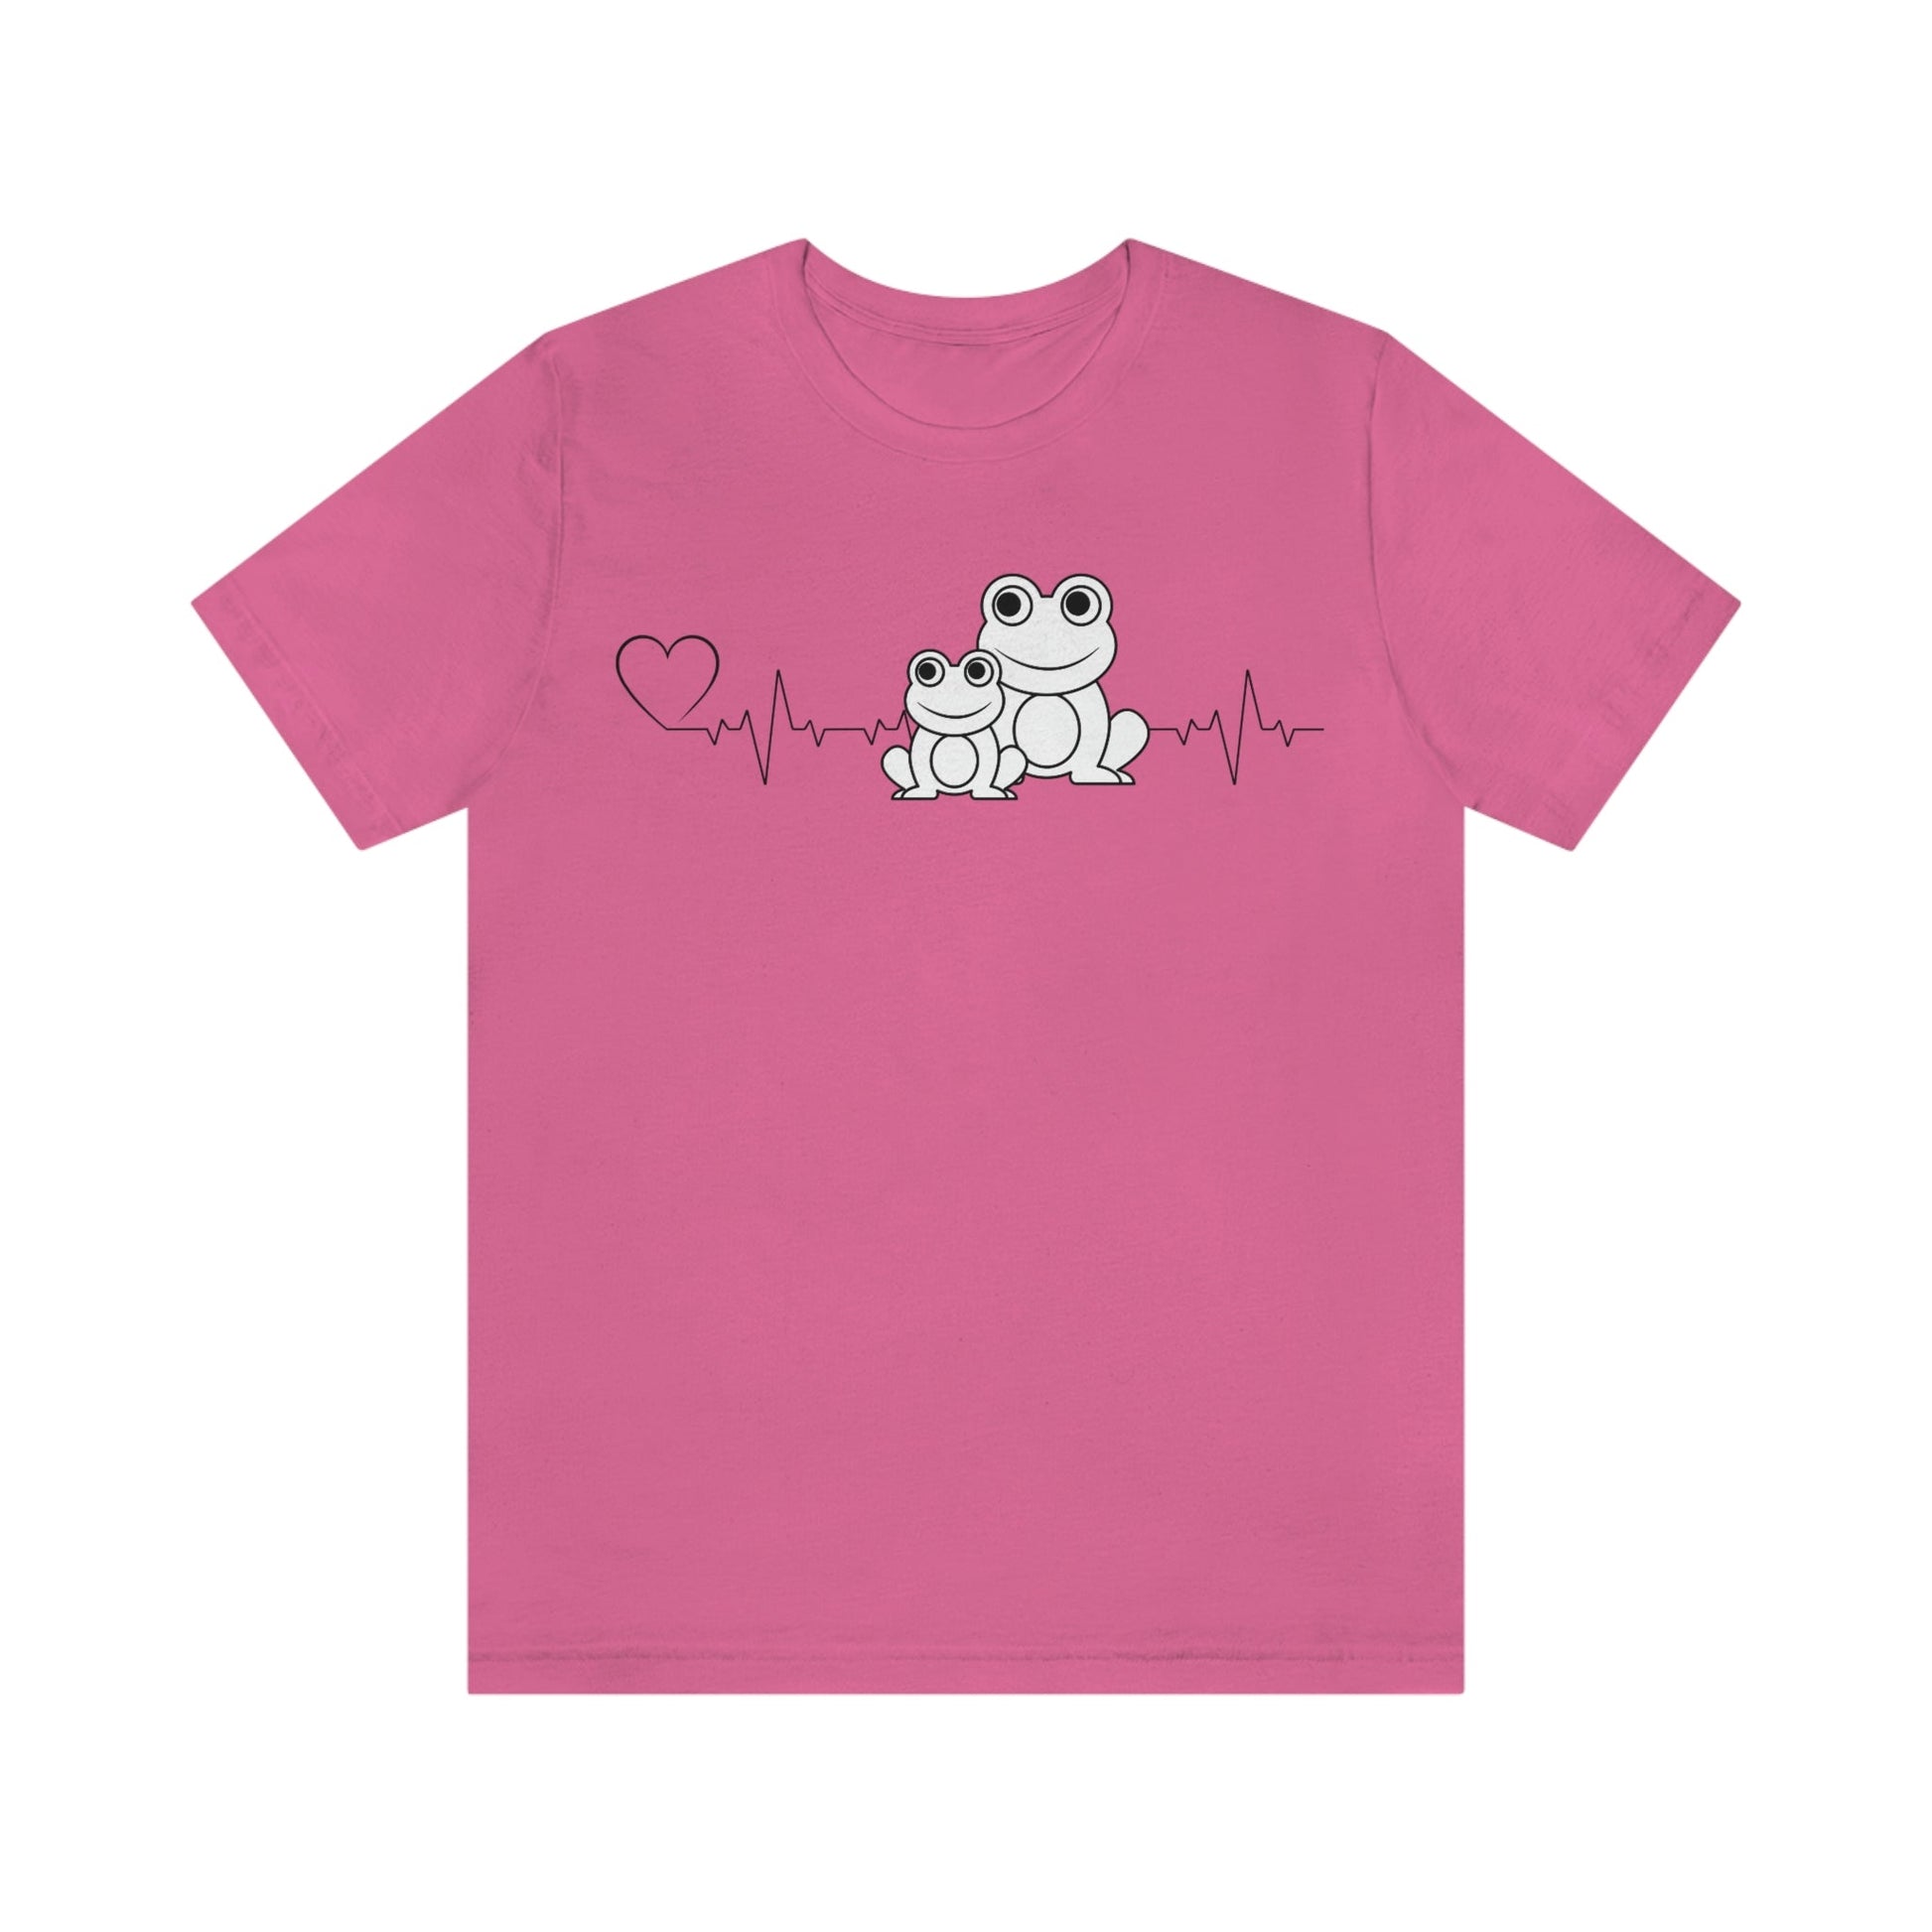 Heartbeat Mom & Baby Frogs Graphic T-Shirt-T-Shirt-Charity Pink-S-mysticalcherry